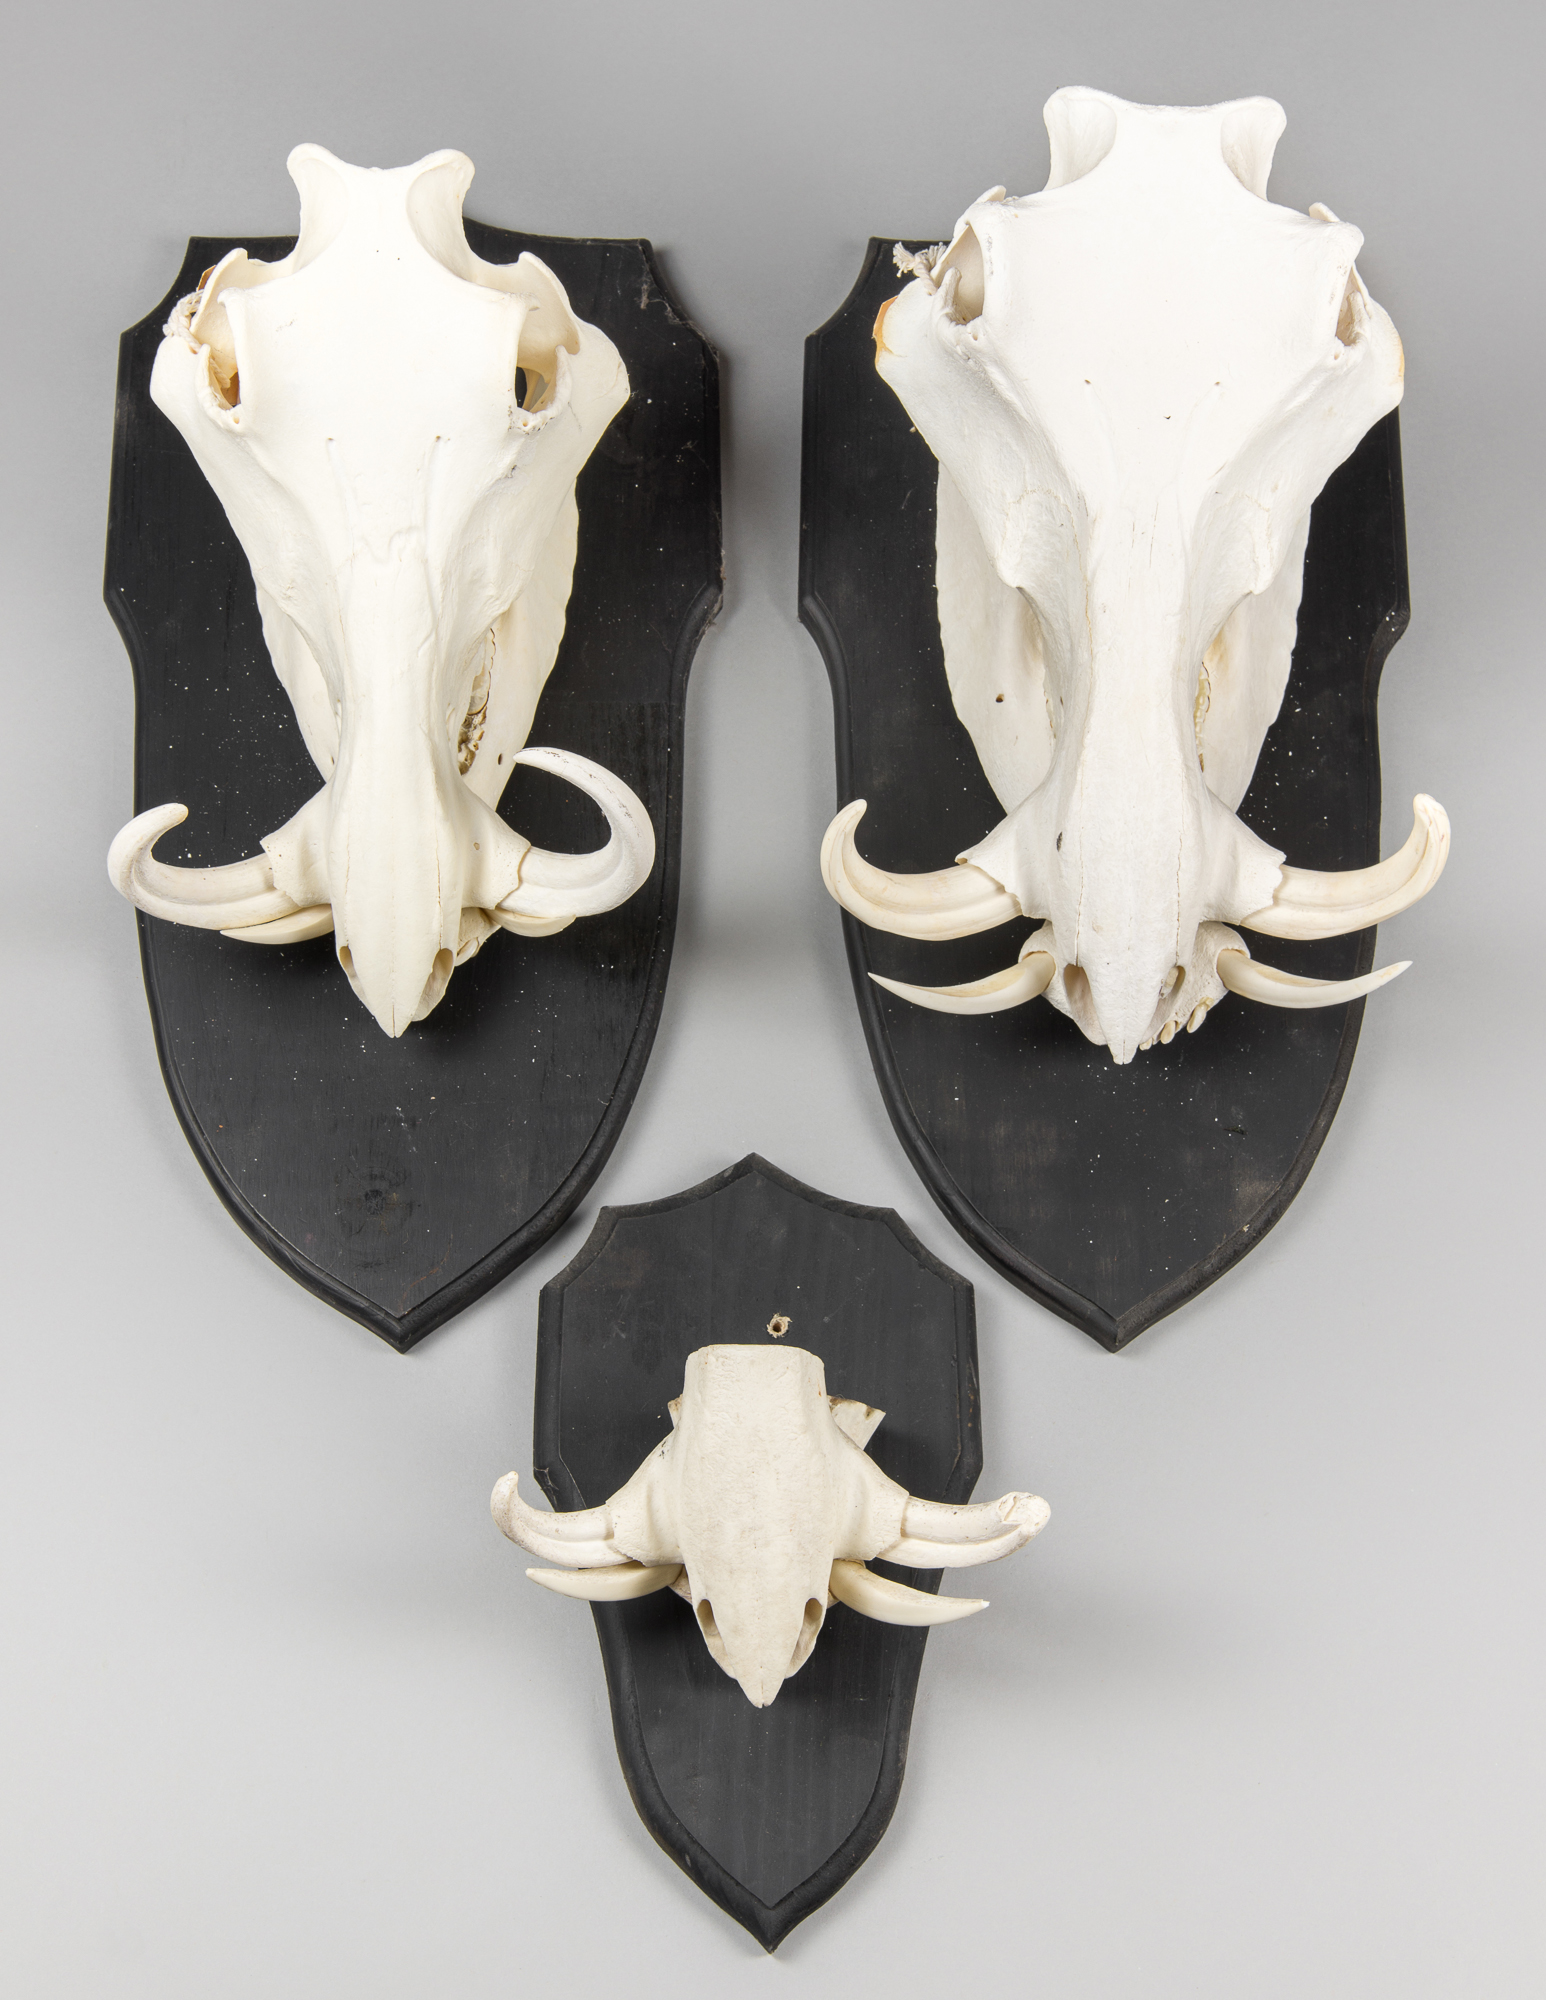 A LATE 20TH CENTURY GROUP OF SHIELD MOUNTED WARTHOG SKULLS. The largest (h 52cm x w 25cm x d 23cm)